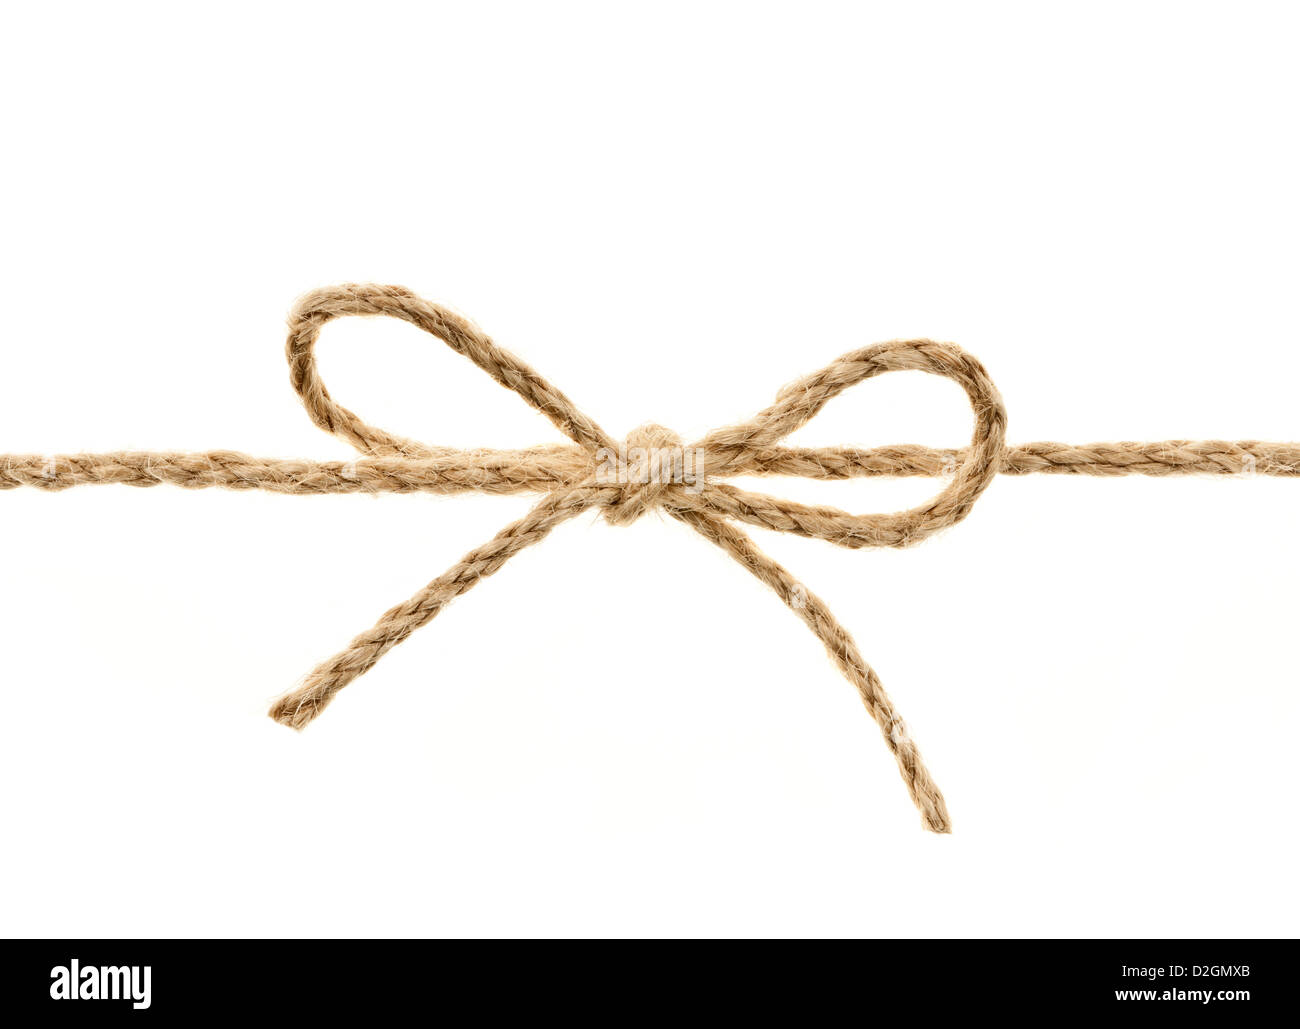 https://c8.alamy.com/comp/D2GMXB/closeup-of-braided-twine-tied-in-a-bow-knot-isolated-on-white-background-D2GMXB.jpg